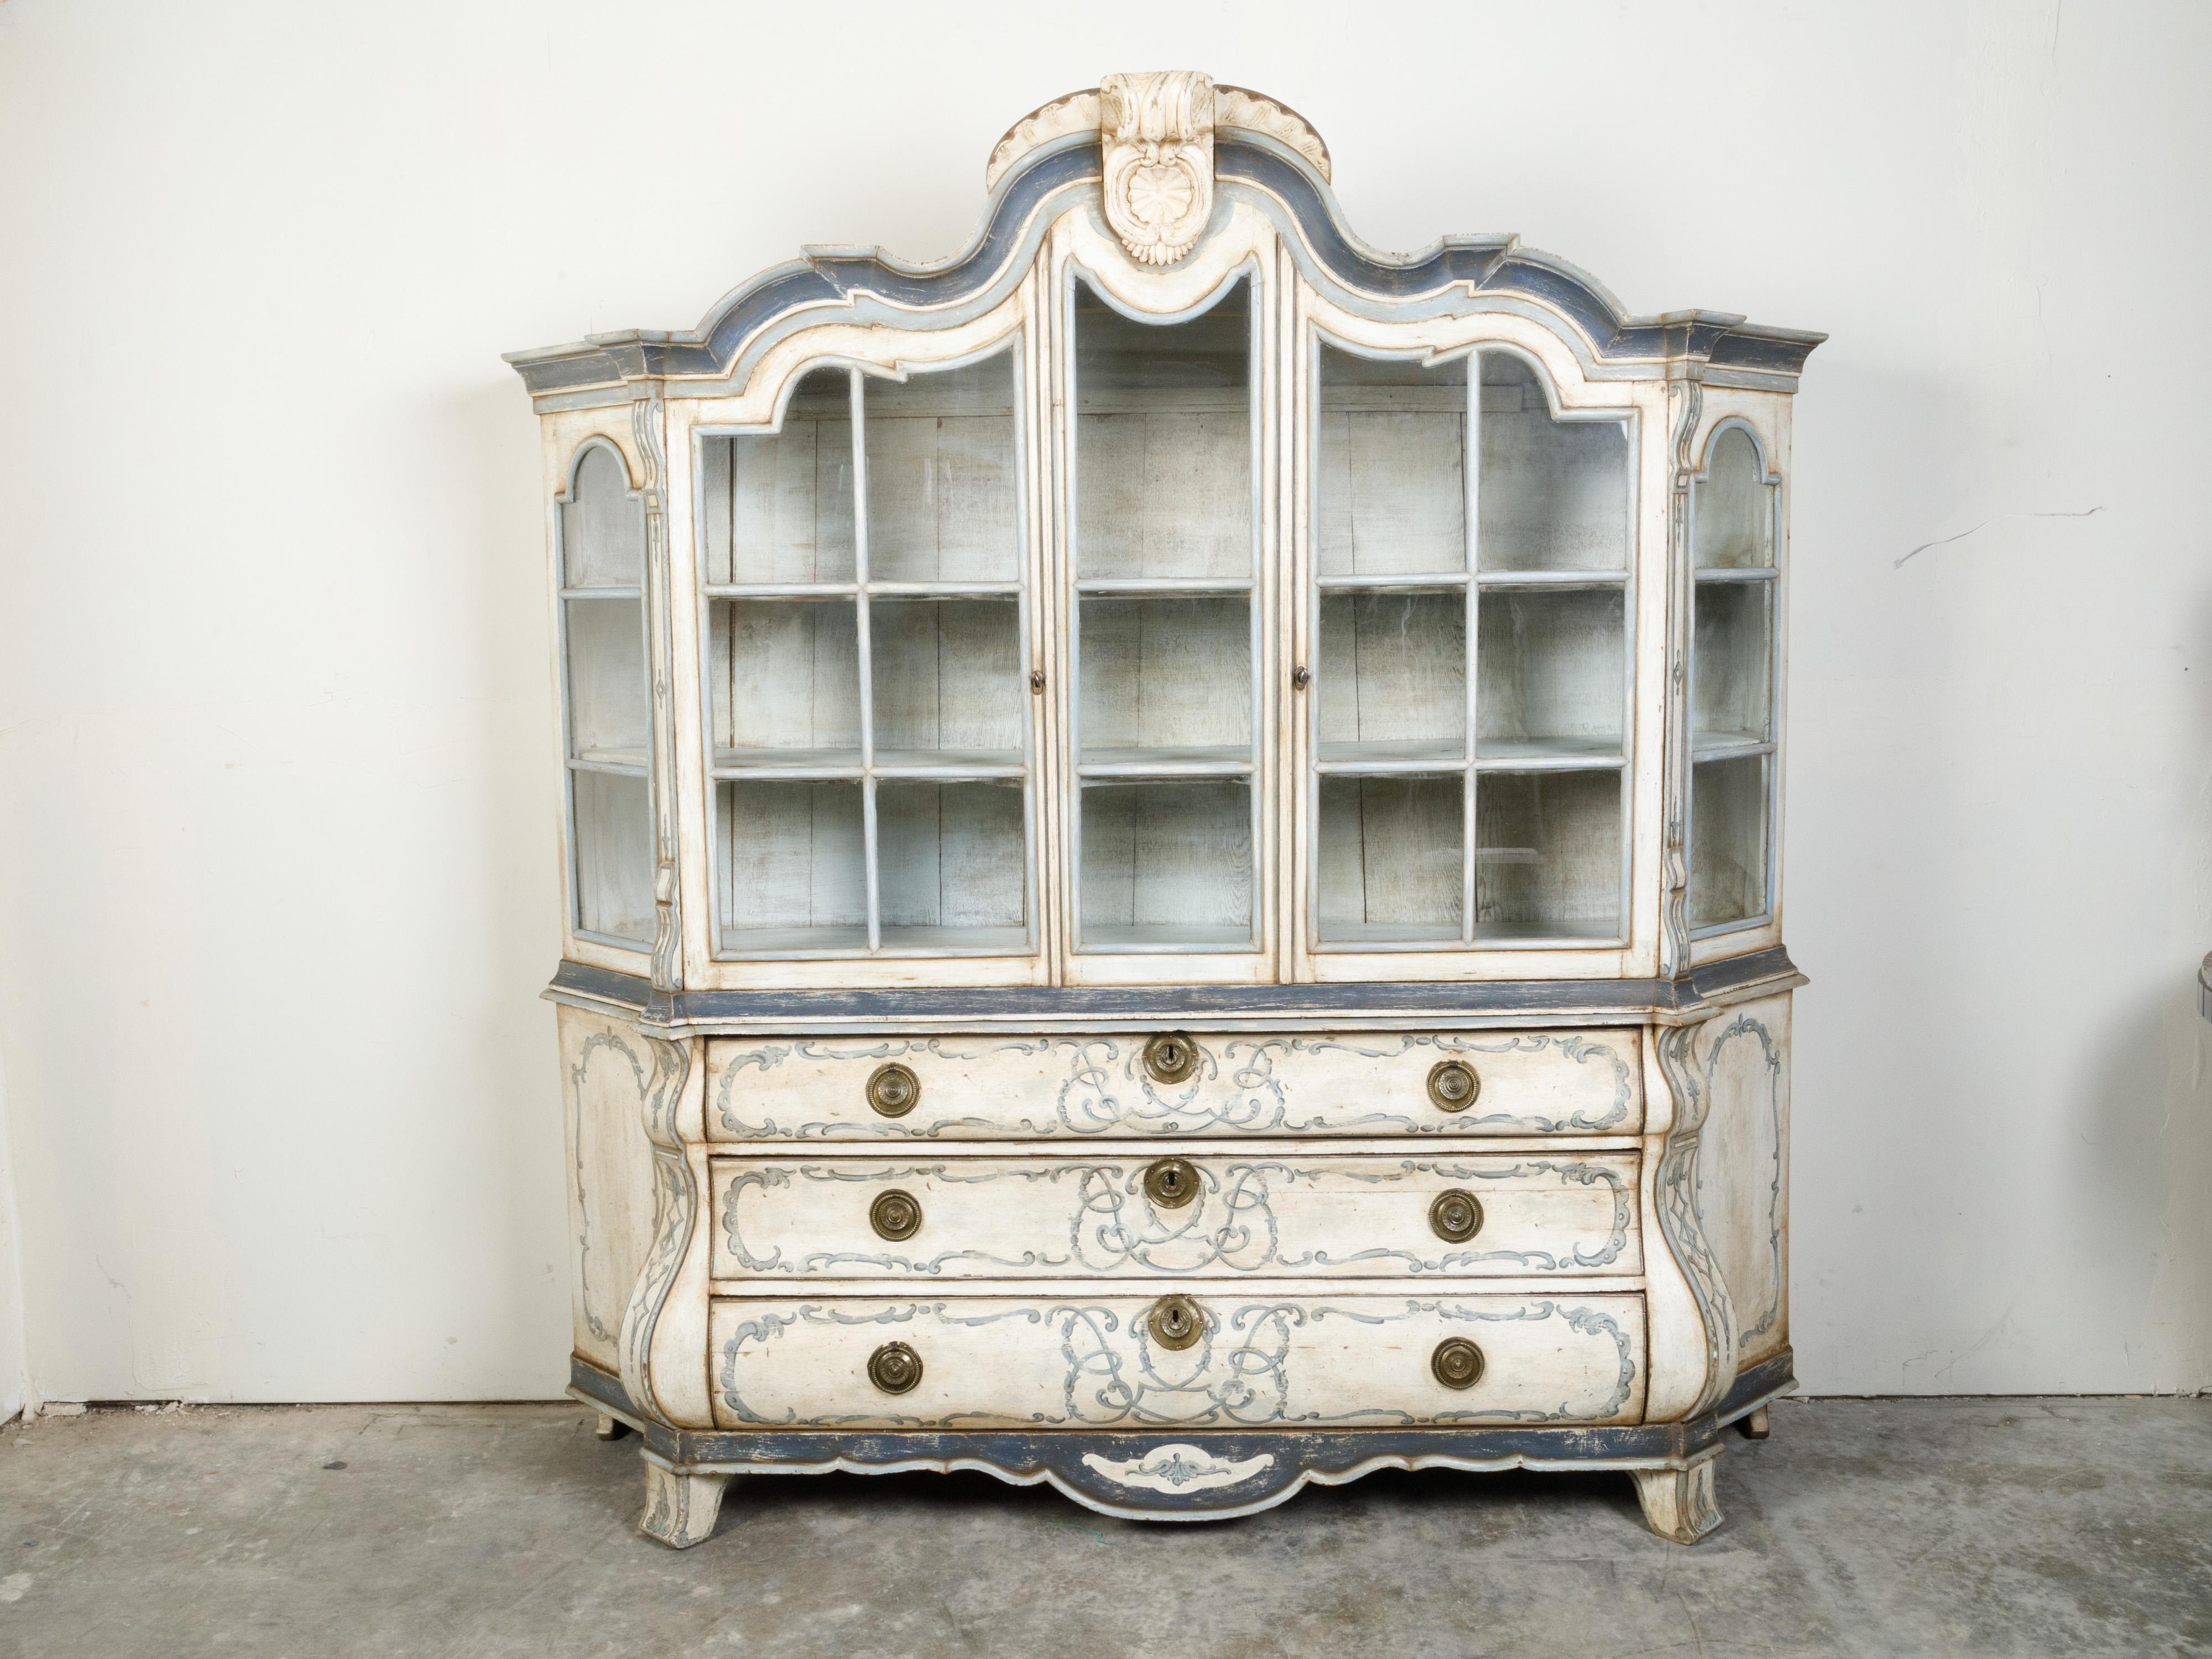 A Dutch painted and carved wooden cabinet from the 19th century, with glass doors and bombé chest. Created in the Netherlands during the 19th century, this large Rococo style cabinet features a carved crest sitting above two glass doors with arched